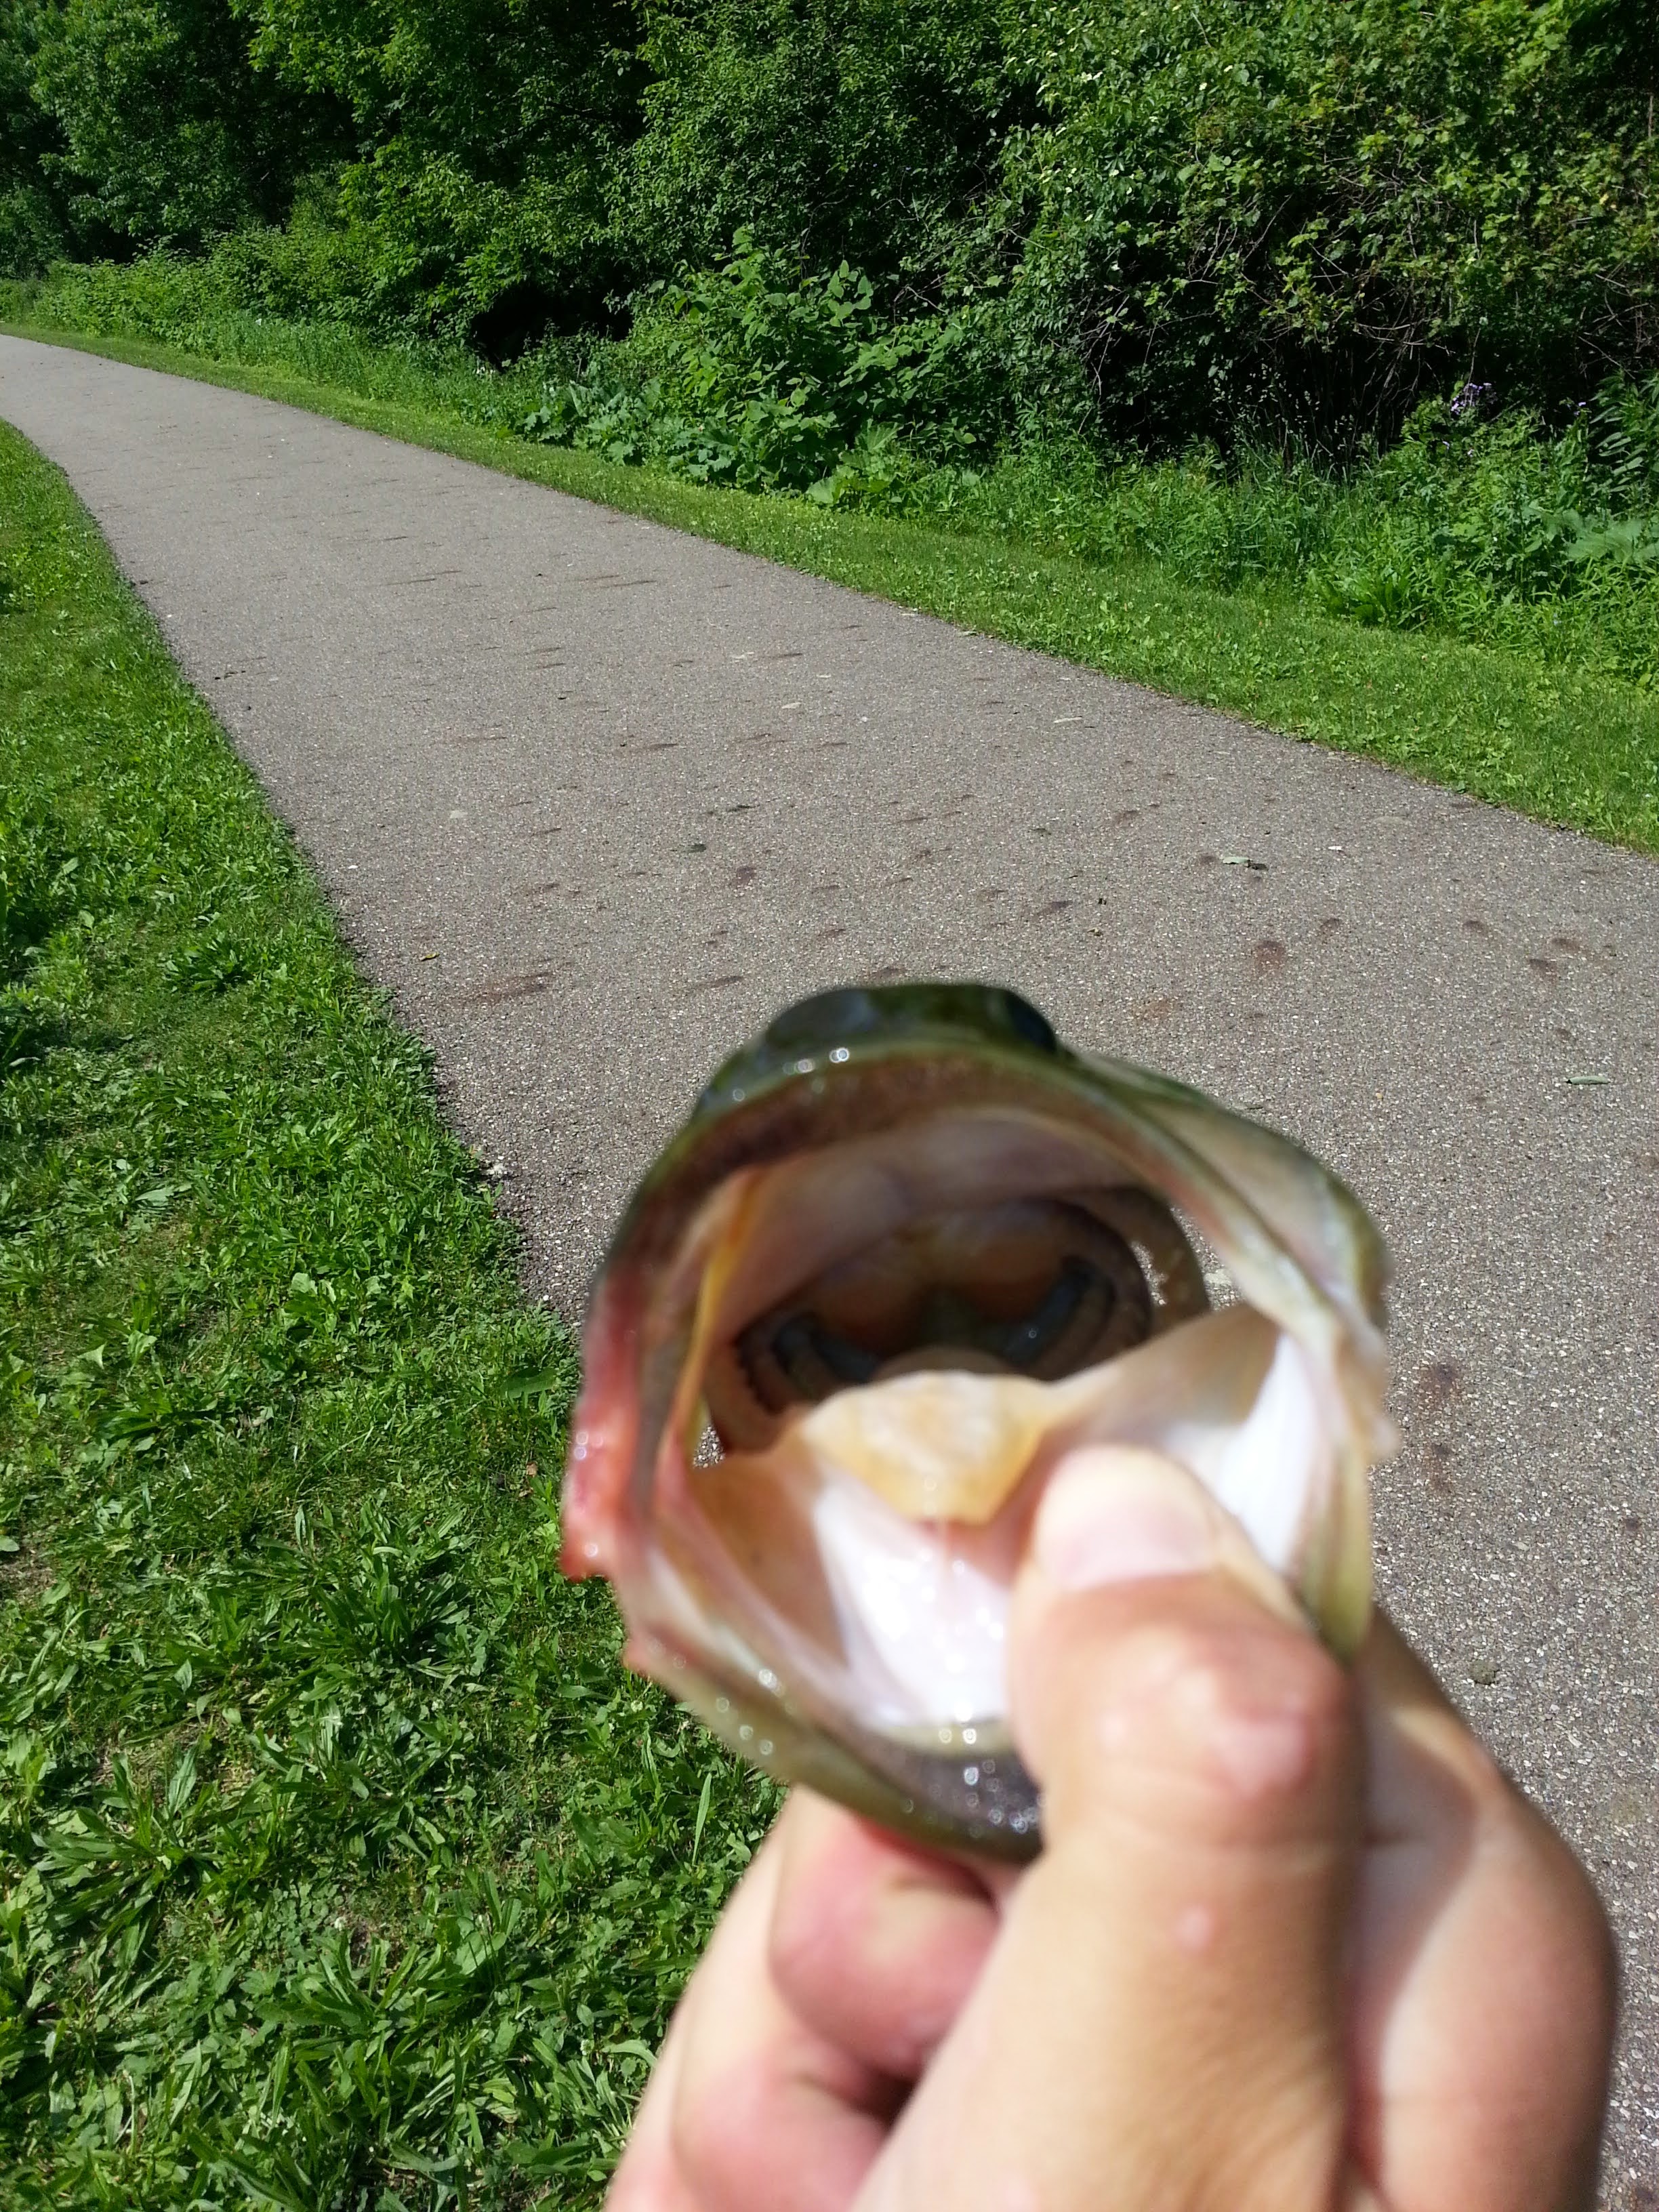 The mouth of a largemouth bass caught in the Ohio Erie Canal